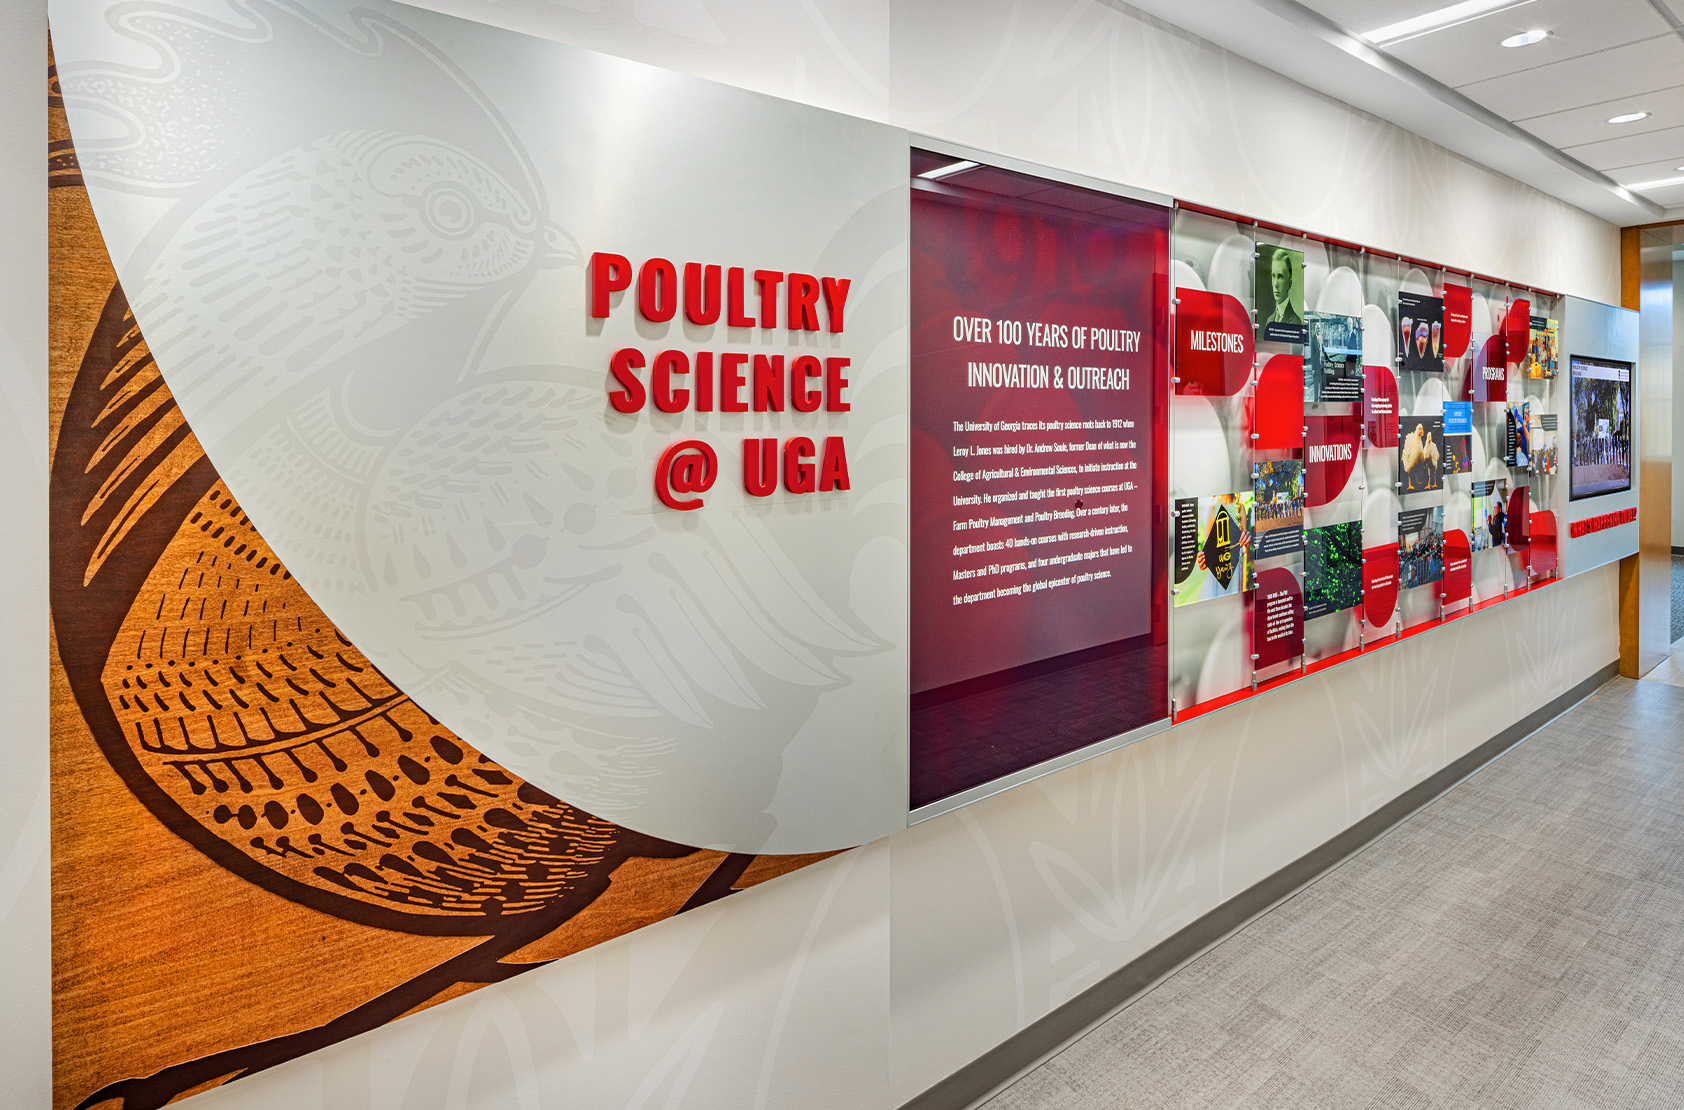 University of Georgia - Poultry Science Complex: Interior hallway installation of 100 years of poultry innovation